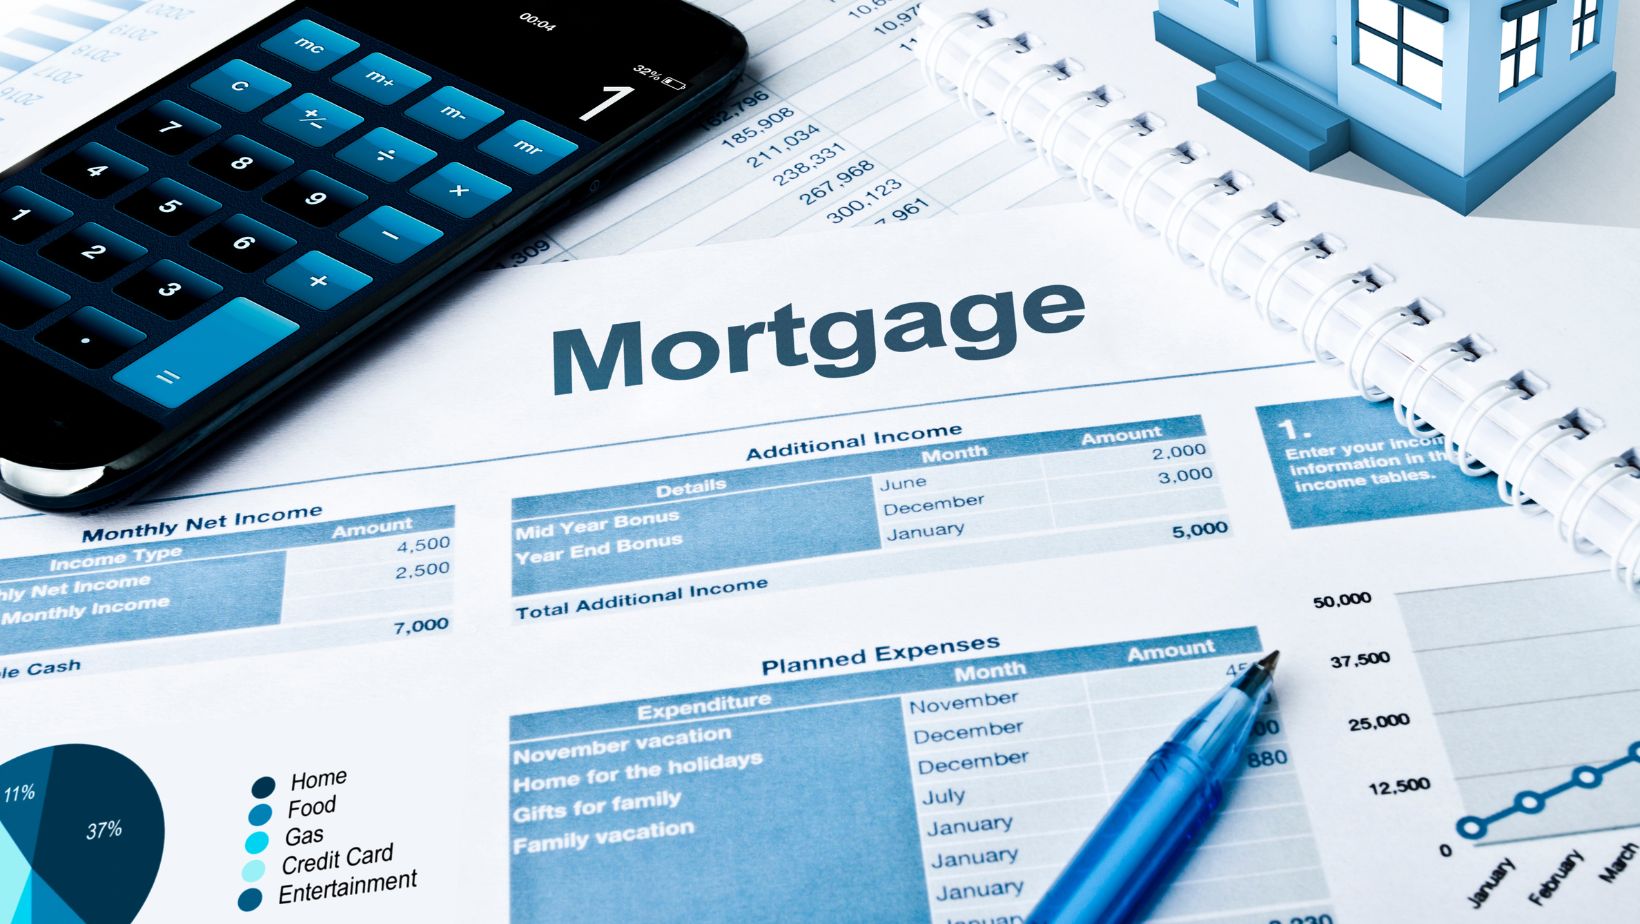 which statement is true of both mortgages and auto loans?